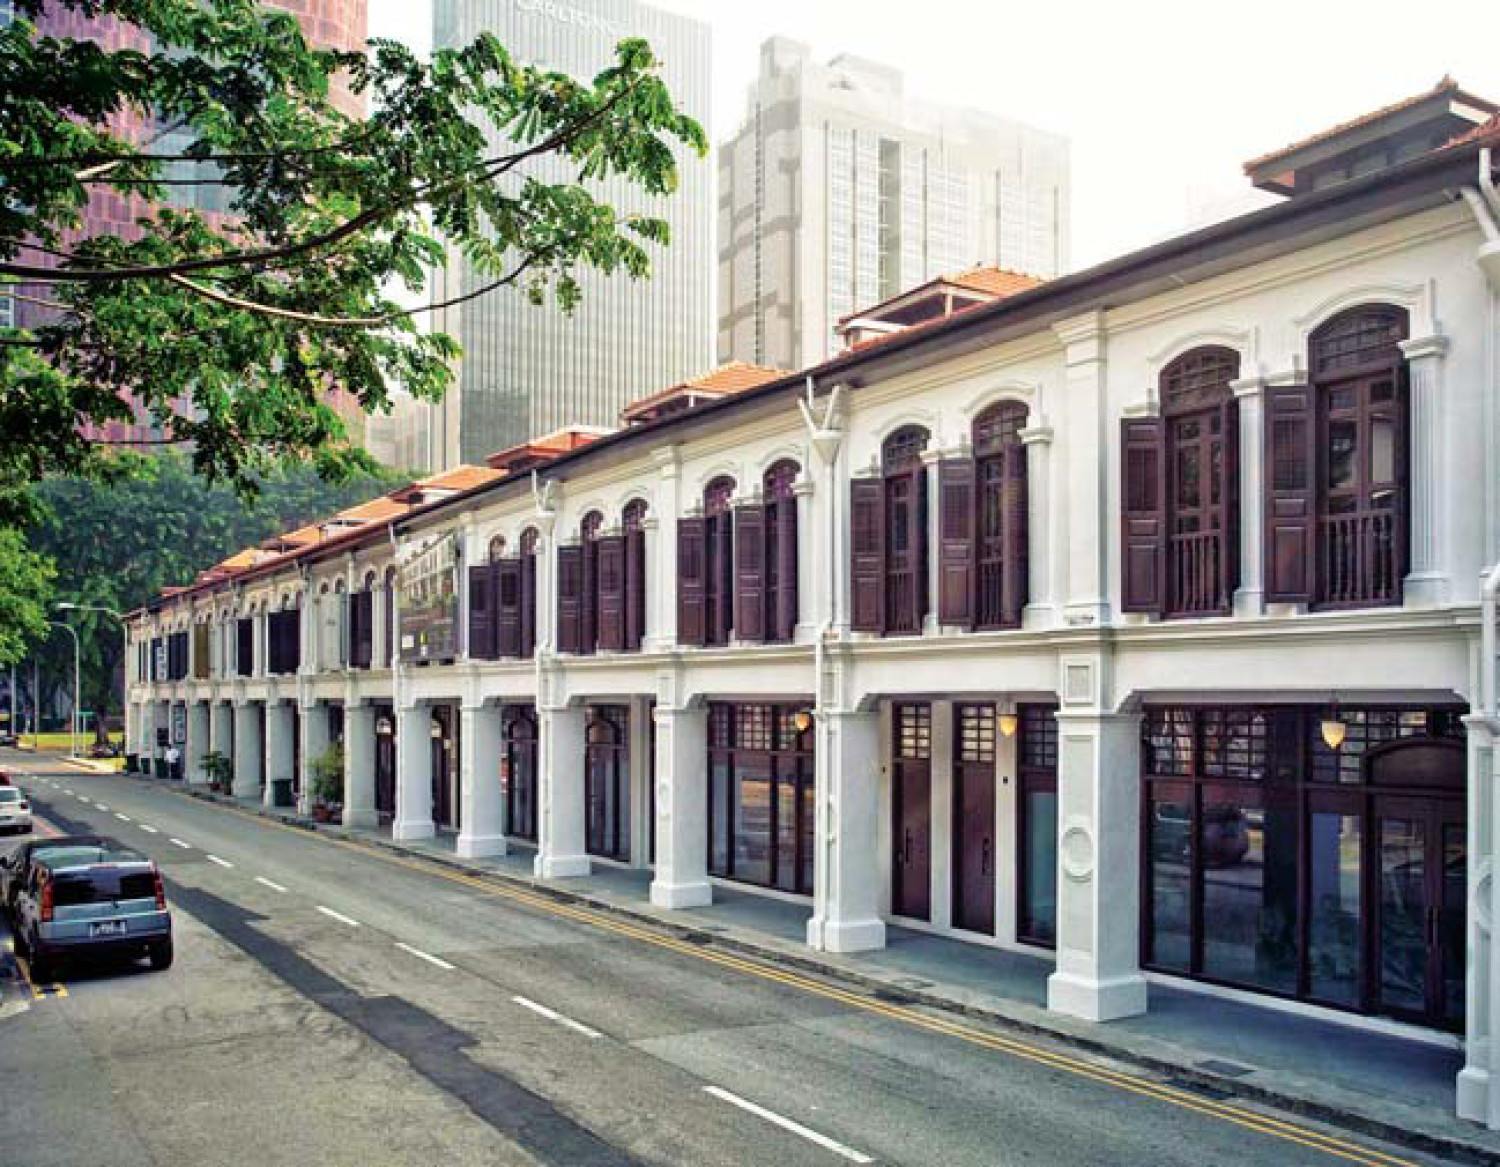 Six shophouses for sale at $58 mil - Property News